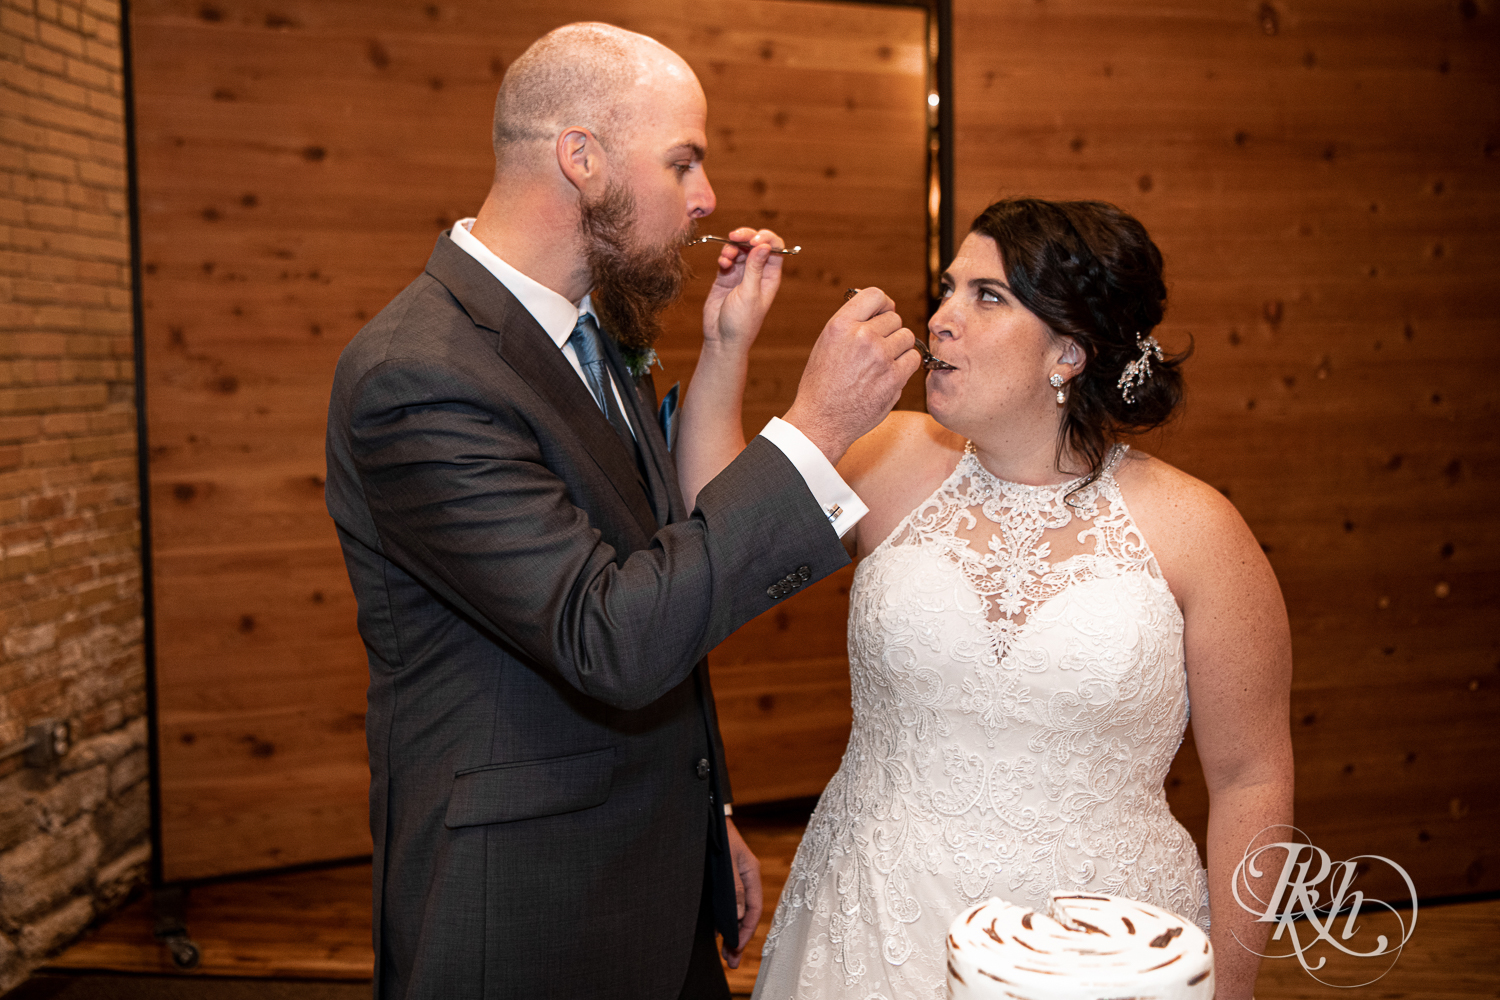 Bride and groom eat wedding cake at Minneapolis Event Centers in Minneapolis, Minnesota.